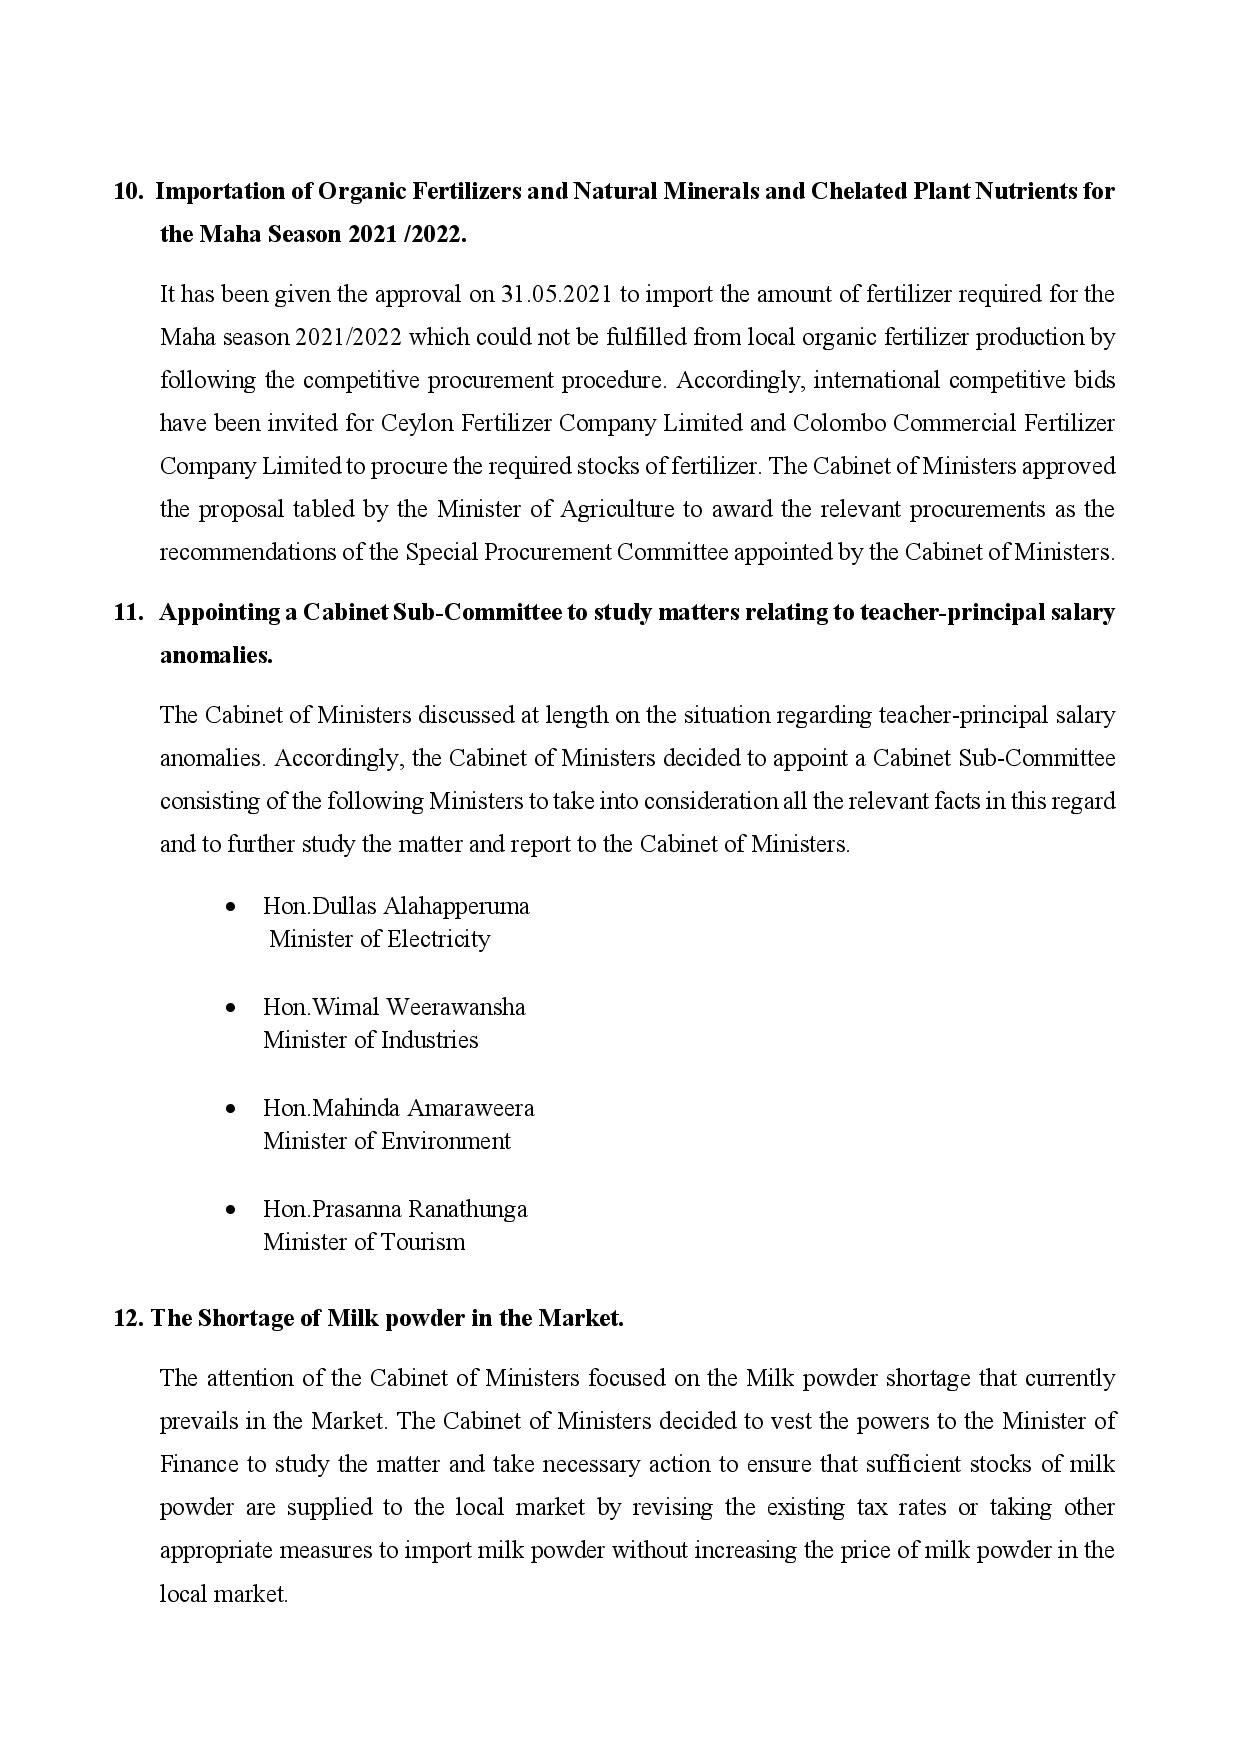 Cabinet Decisions on 09.08.2021 English page 004